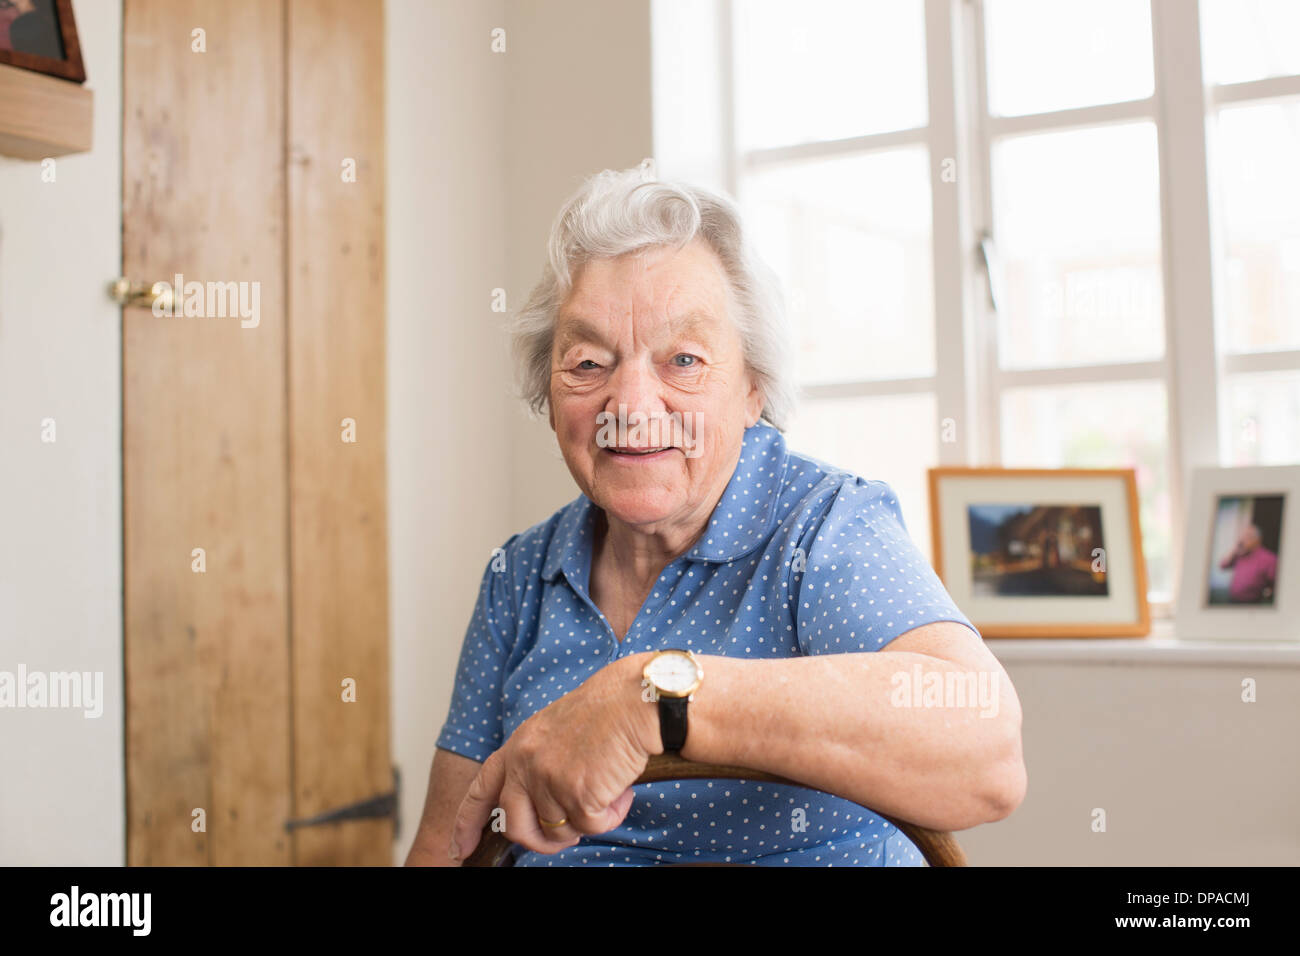 Senior adult woman sitting in room Stock Photo